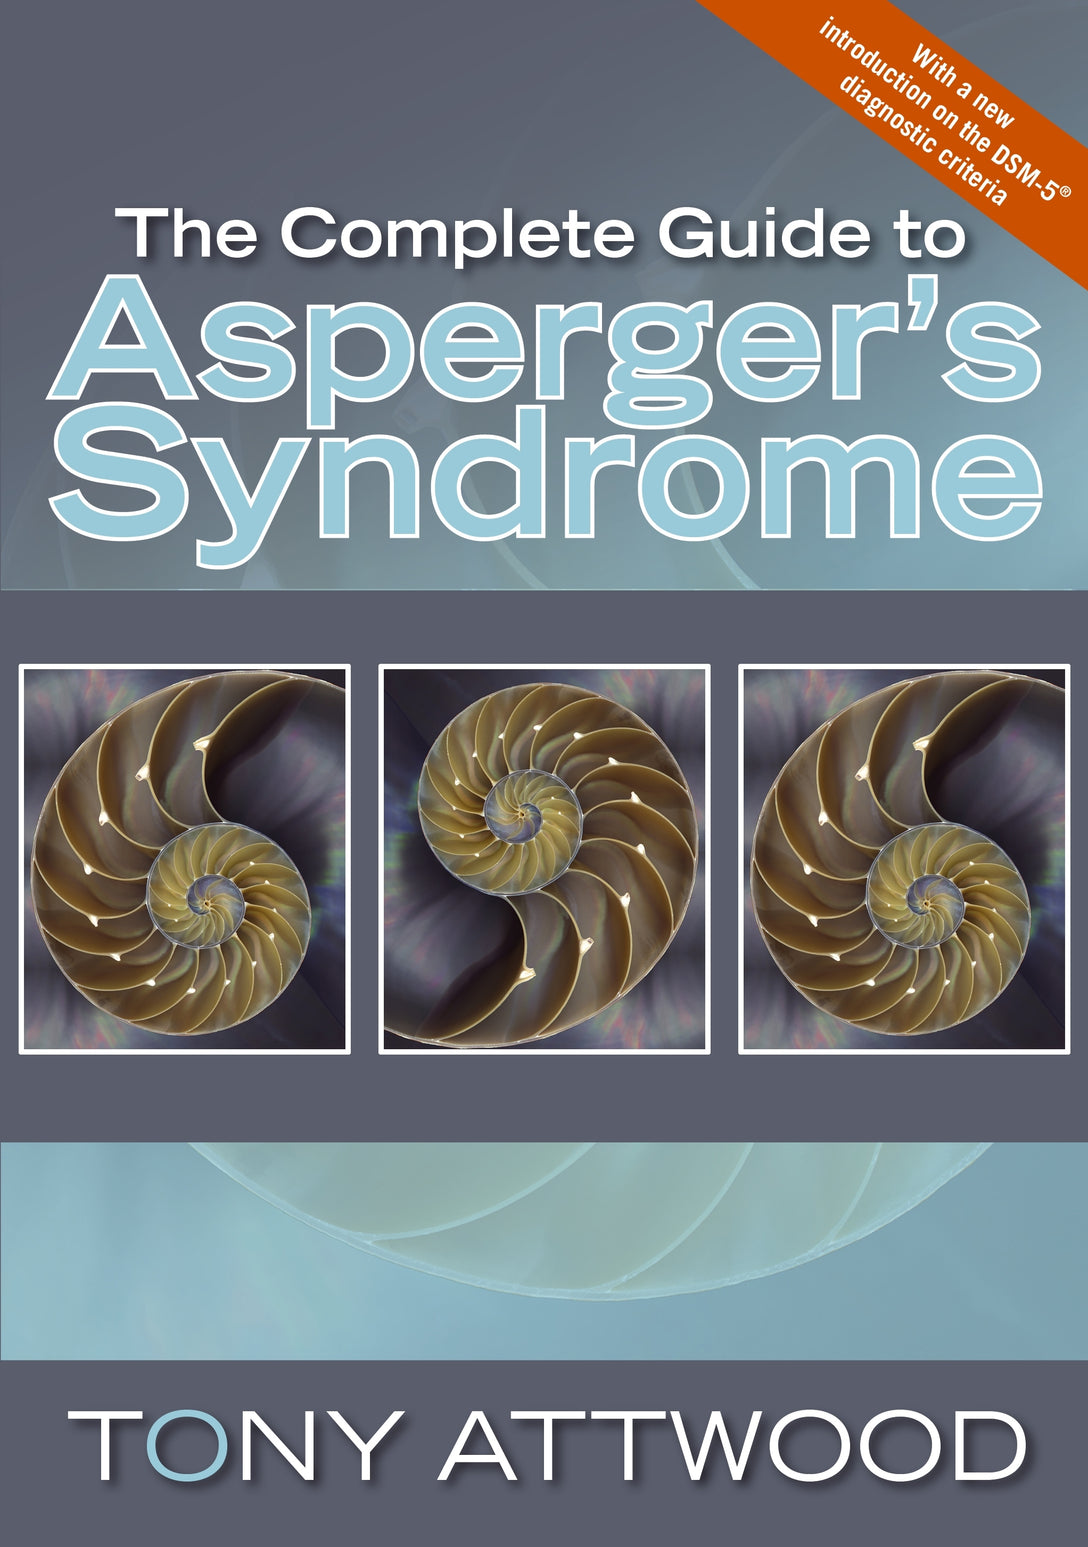 The Complete Guide to Asperger's Syndrome by Dr Anthony Attwood